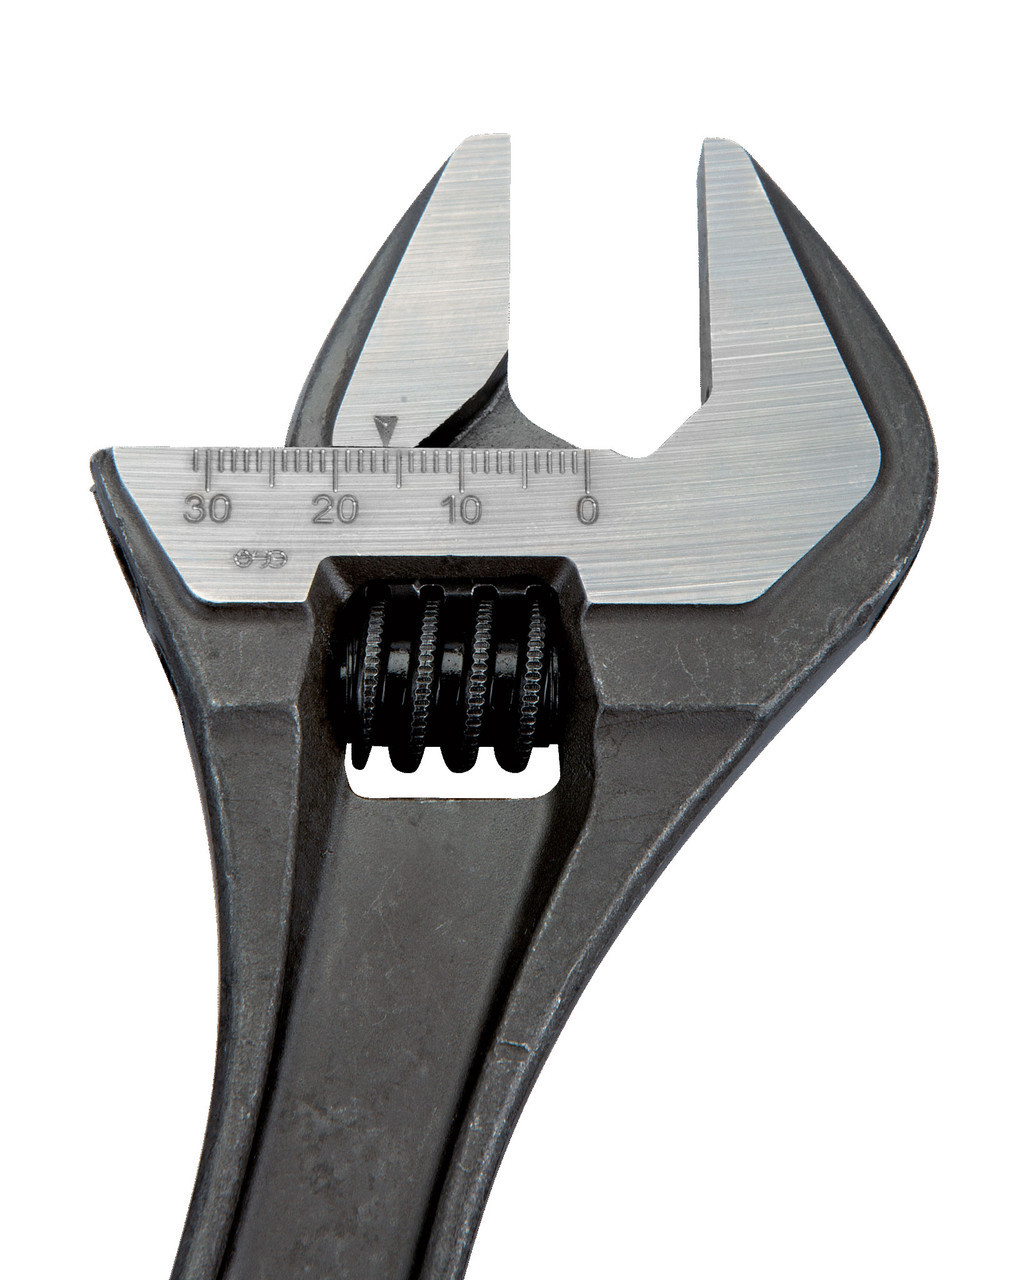 Williams 18 Williams Black Adjustable Wrench with Steel Handle - 8075 R US